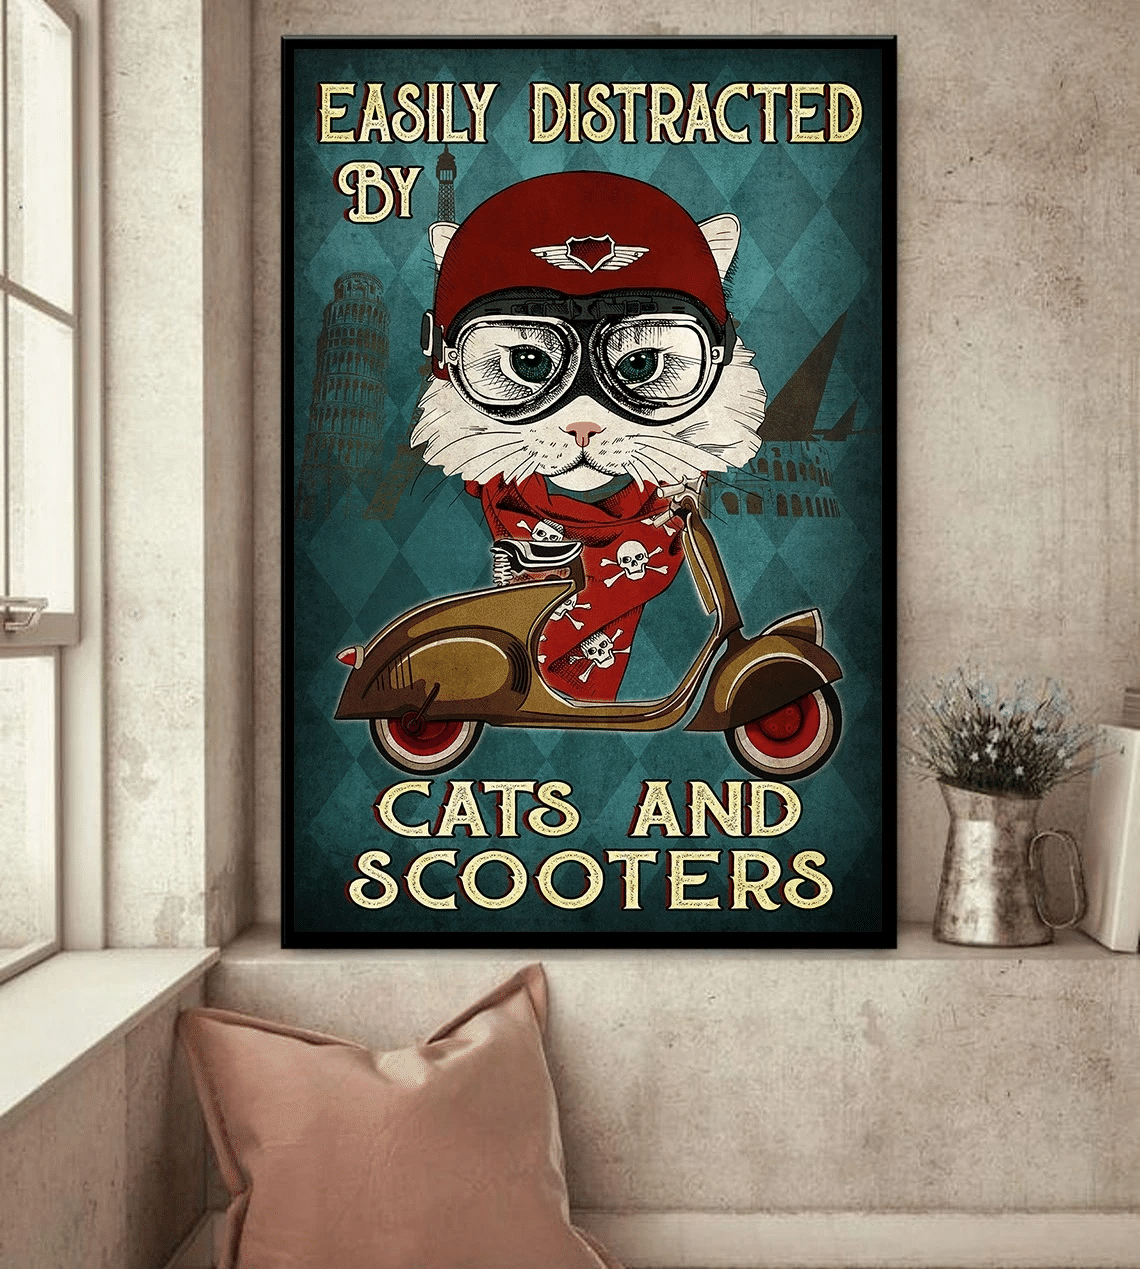 Pet Easily Distracted By Cats And Scooters Poster Decor Wall Art Visual Art